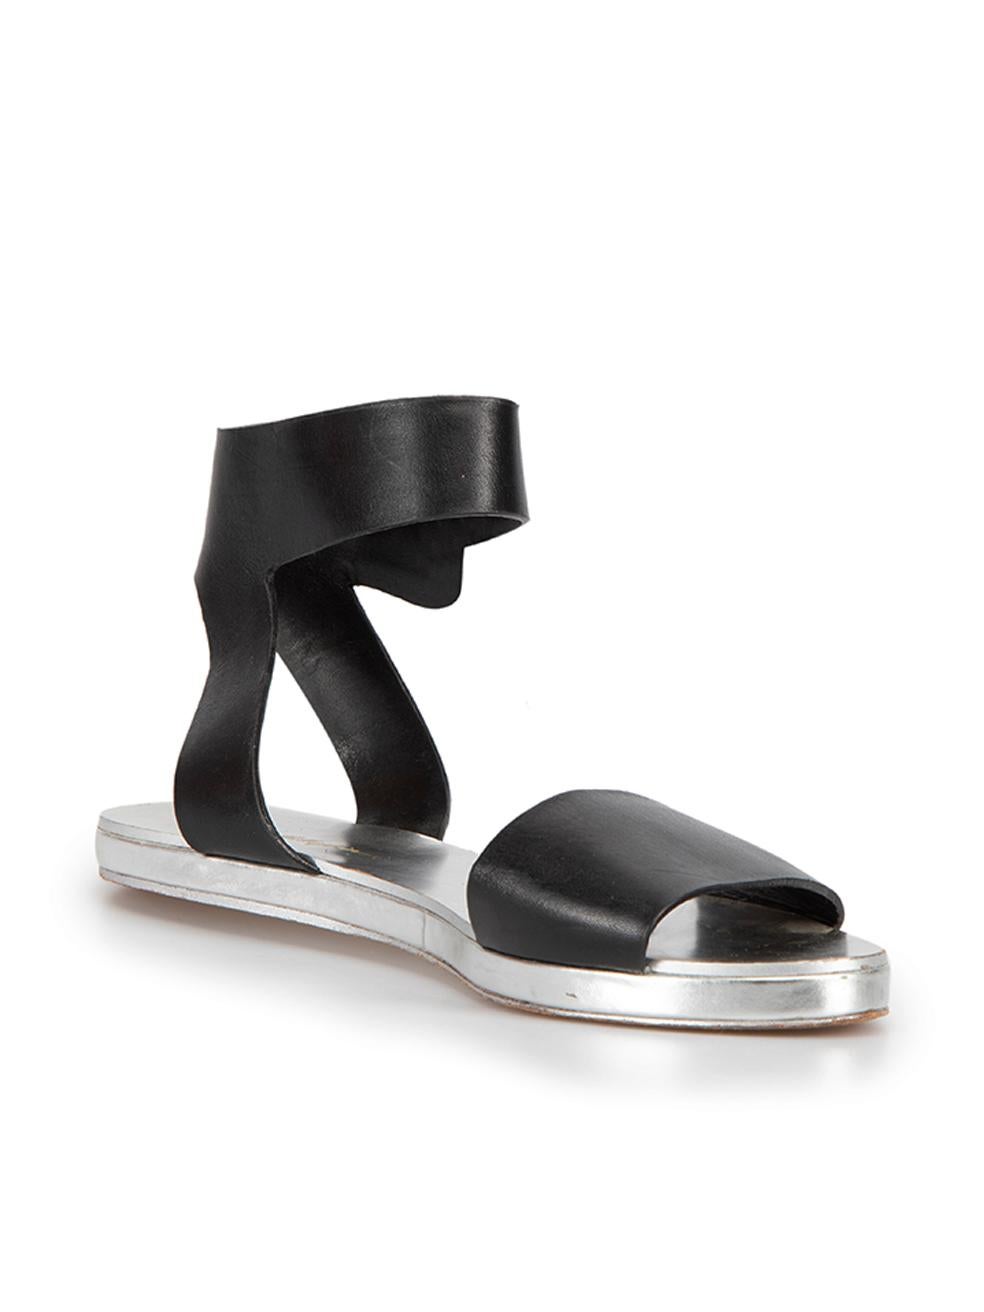 CONDITION is Very good. Minimal wear to shoes is evident. Minimal wear to both footbeds and outer sols with small scuff marks on this used 3.1 Phillip Lim designer resale item.



Details


Black

Leather

Sandals

Open toe

Flat heel

Ankle buckled